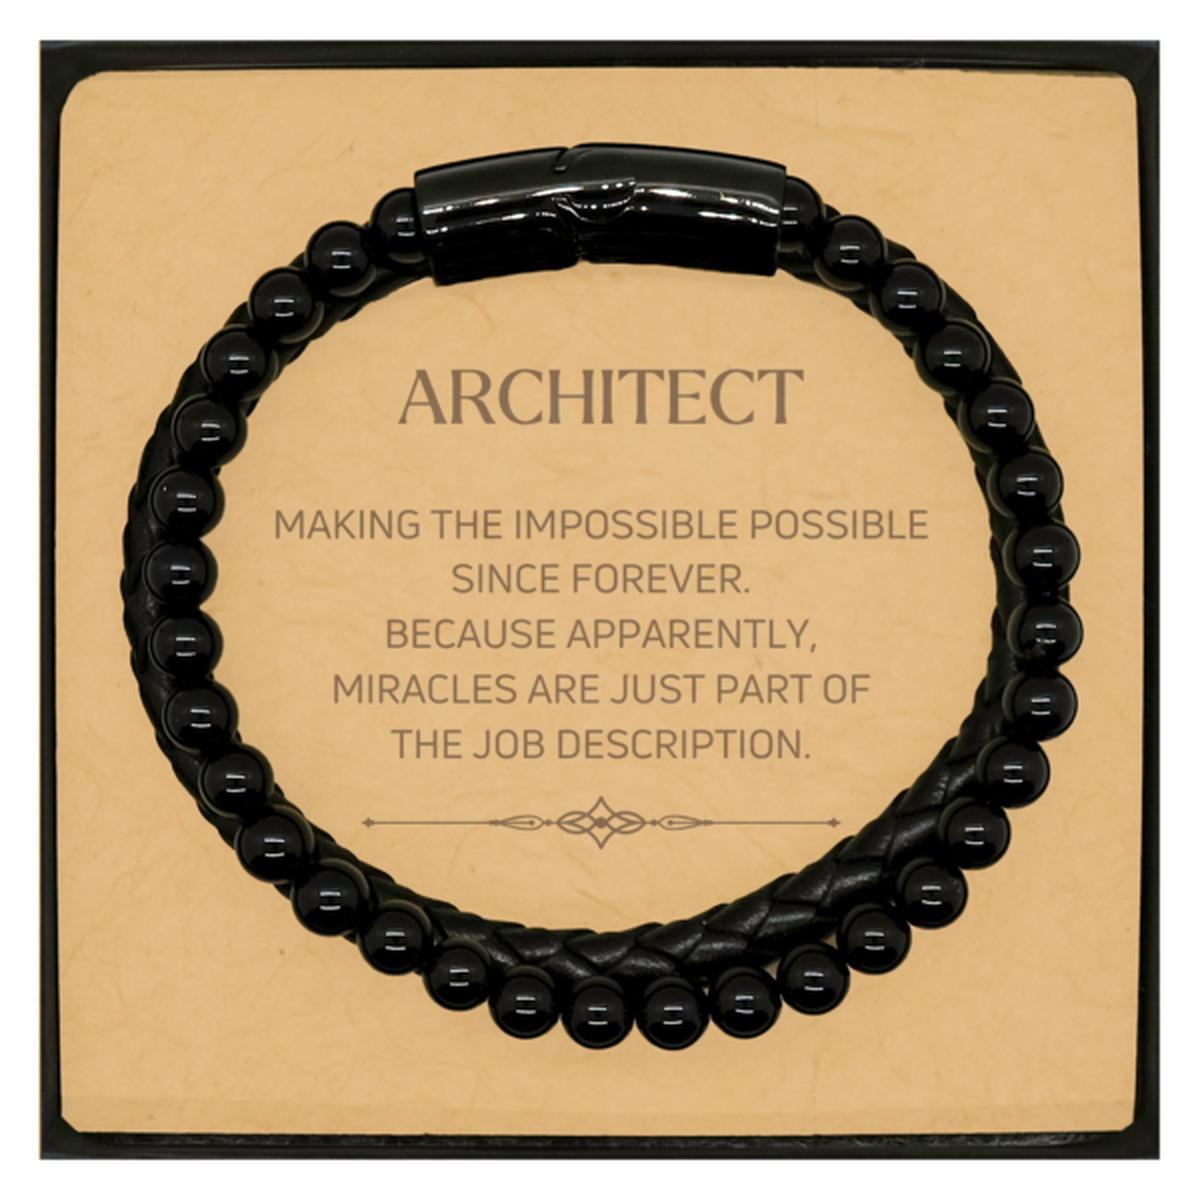 Funny Architect Gifts, Miracles are just part of the job description, Inspirational Birthday Christmas Stone Leather Bracelets For Architect, Men, Women, Coworkers, Friends, Boss